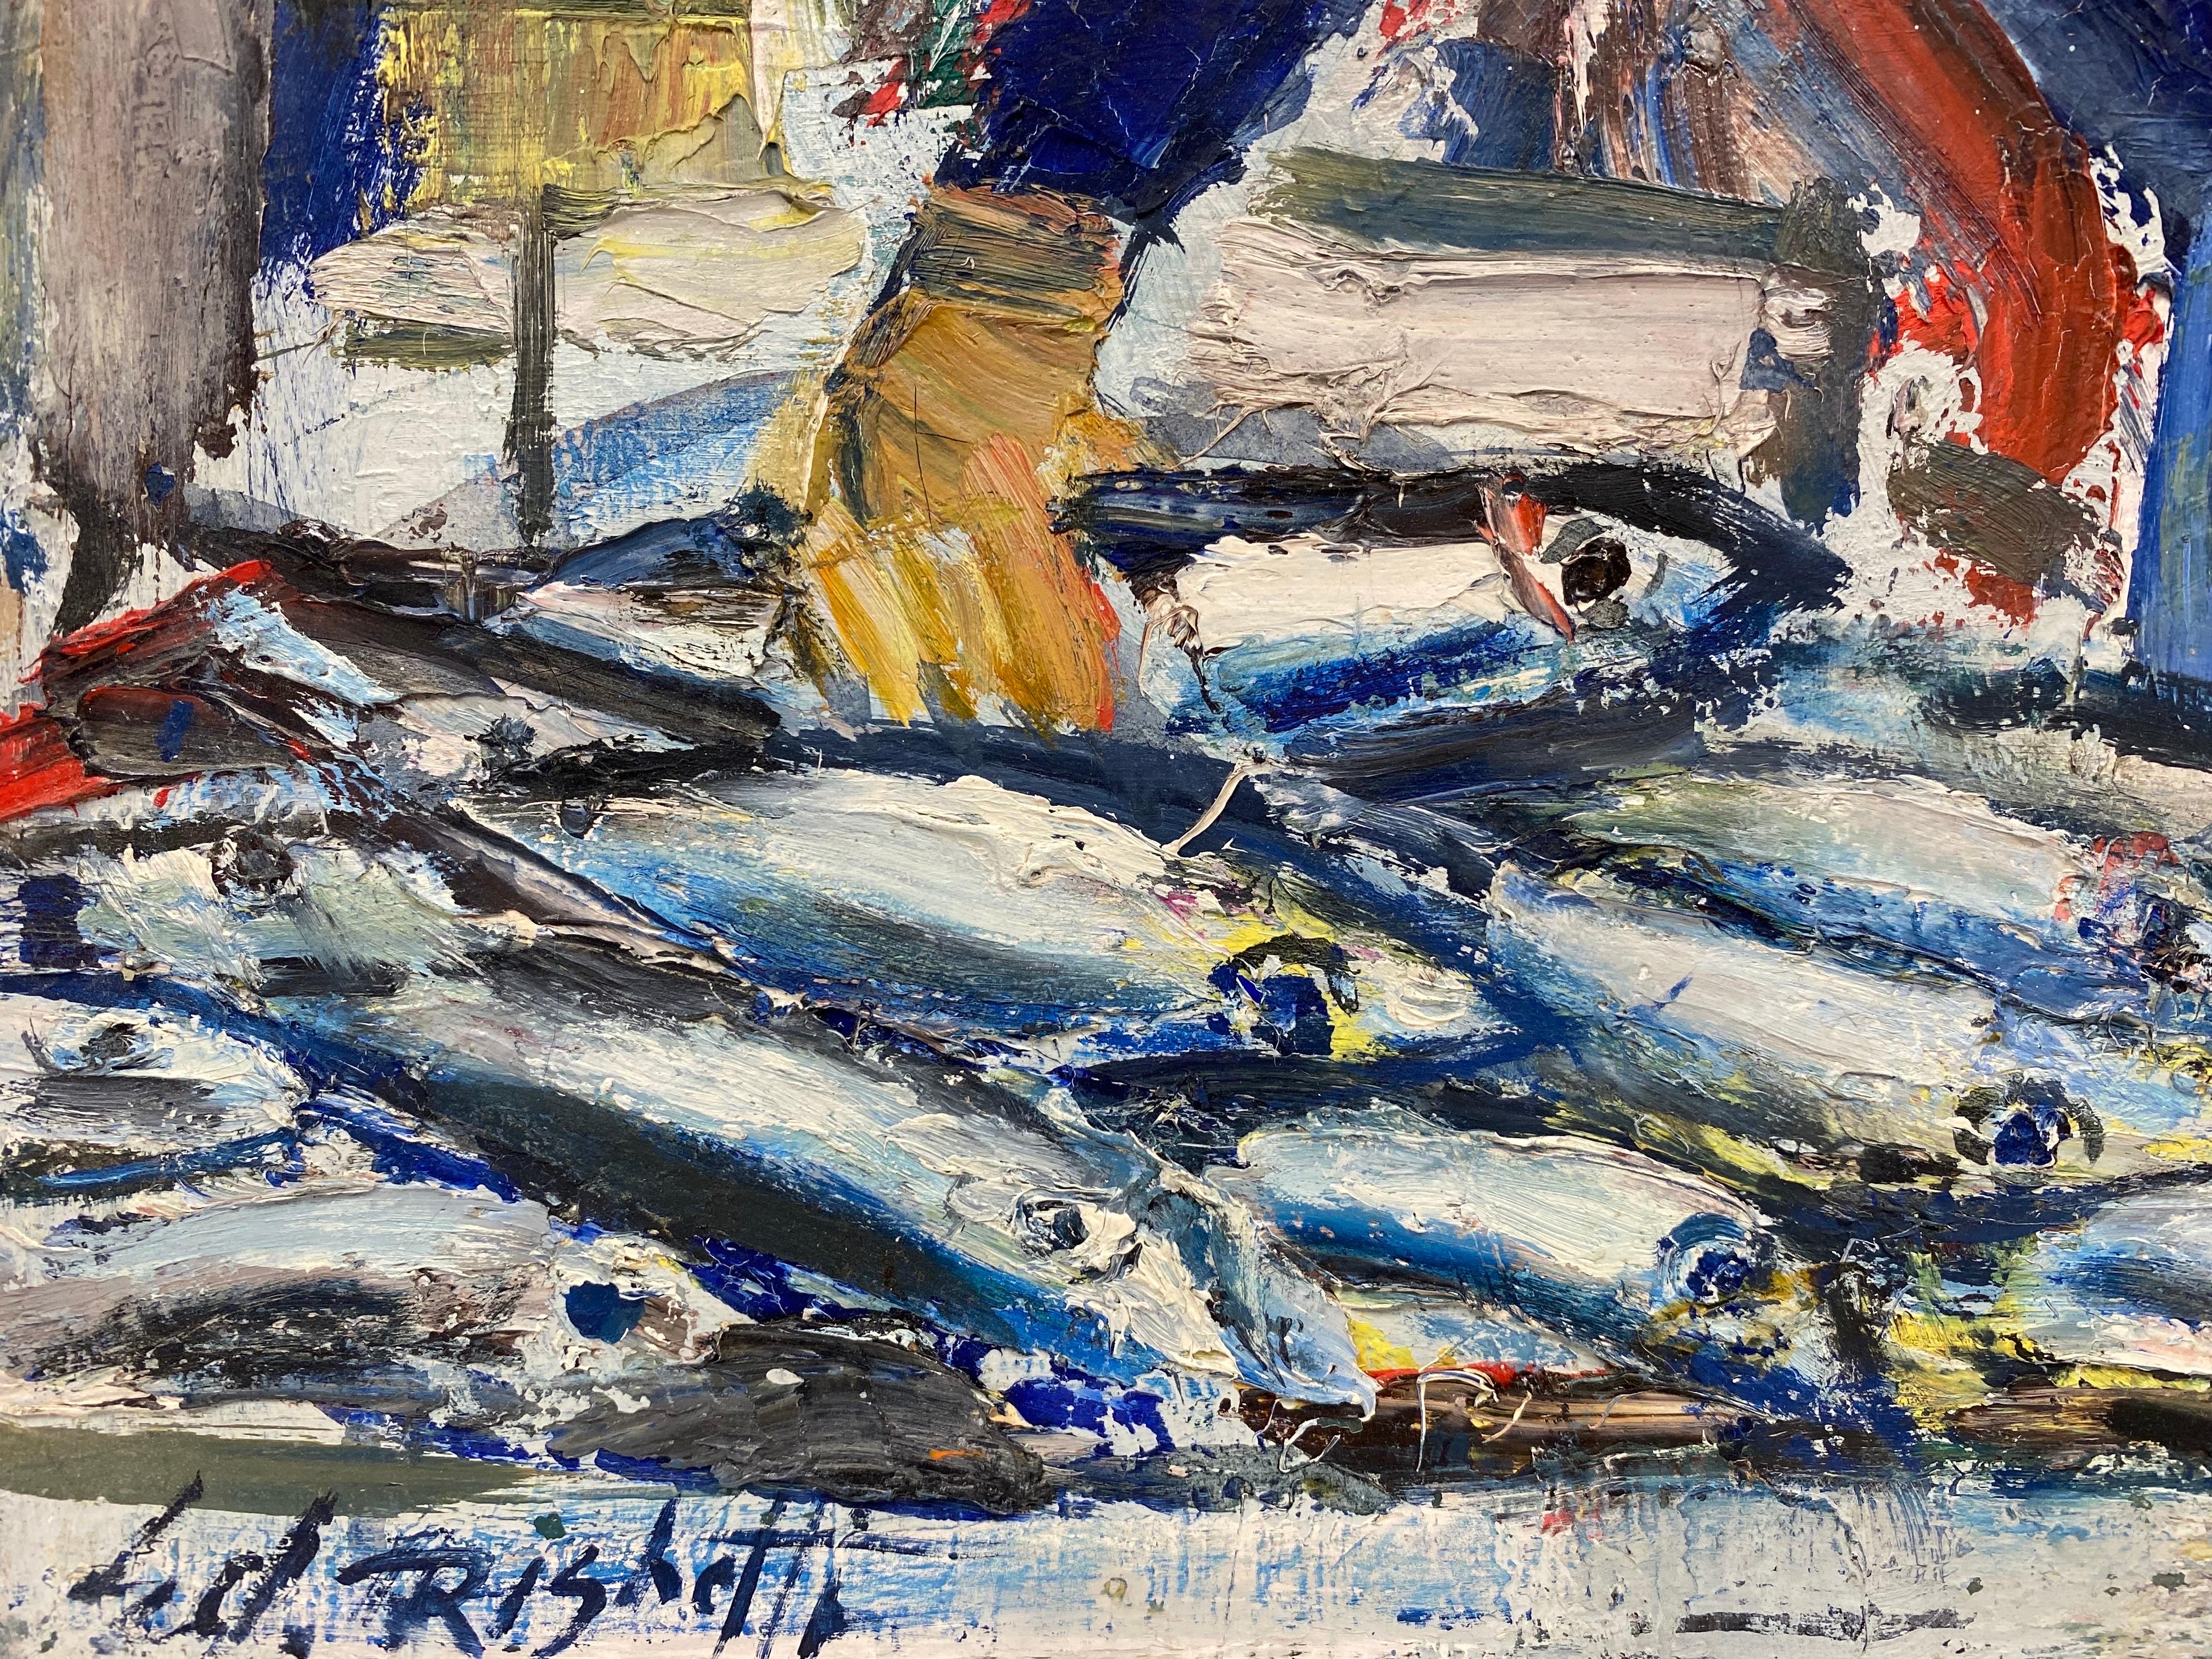 The Fish Market, Original French Mid Century Post-Impressionist Oil - Fisherman - Gray Figurative Painting by Édouard Righetti (1924-2001)